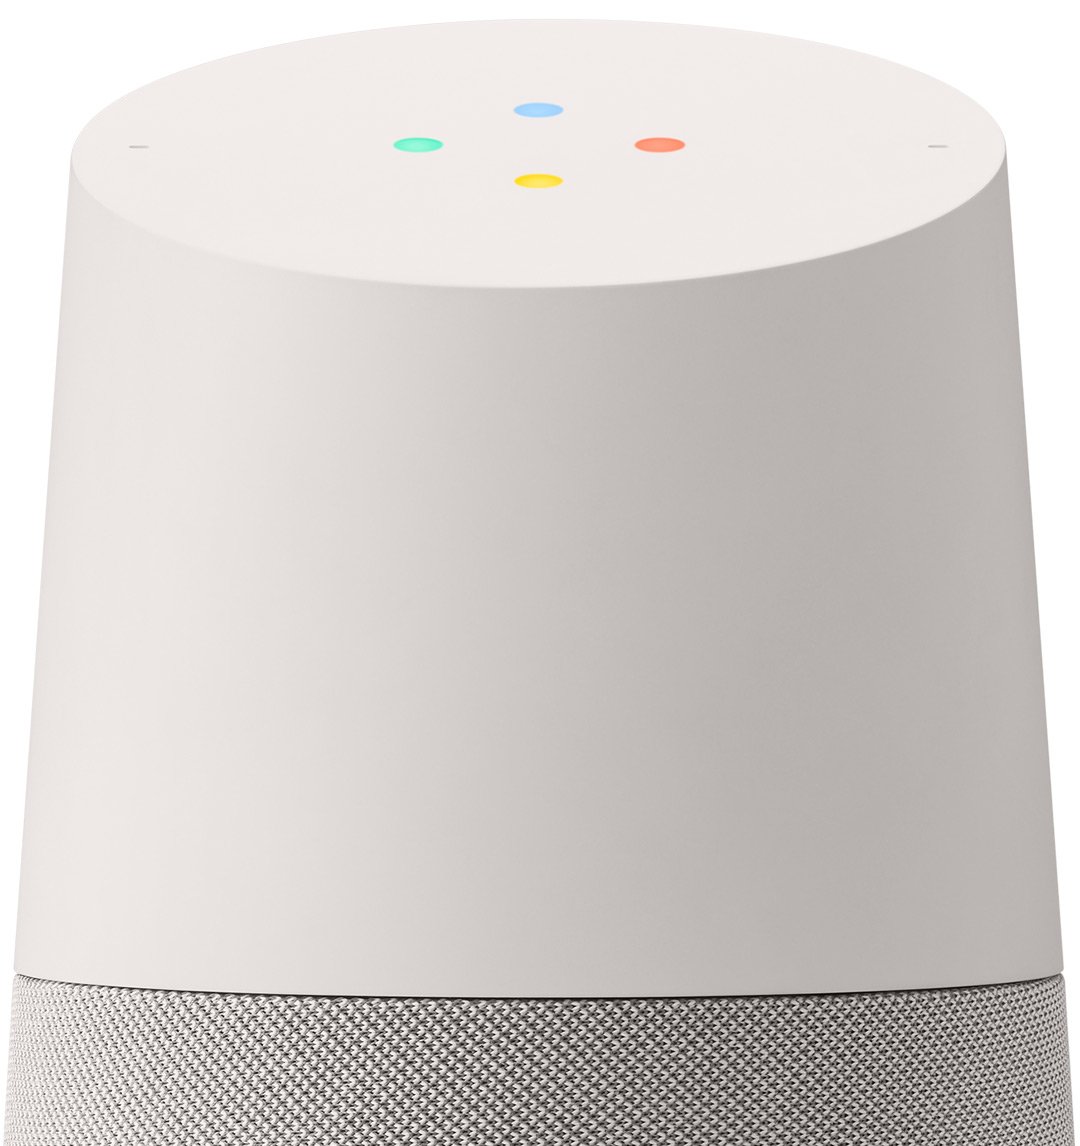 Google Home uses a trackpad for touch to control volume and music, and to enable listening of the device. Source: Google